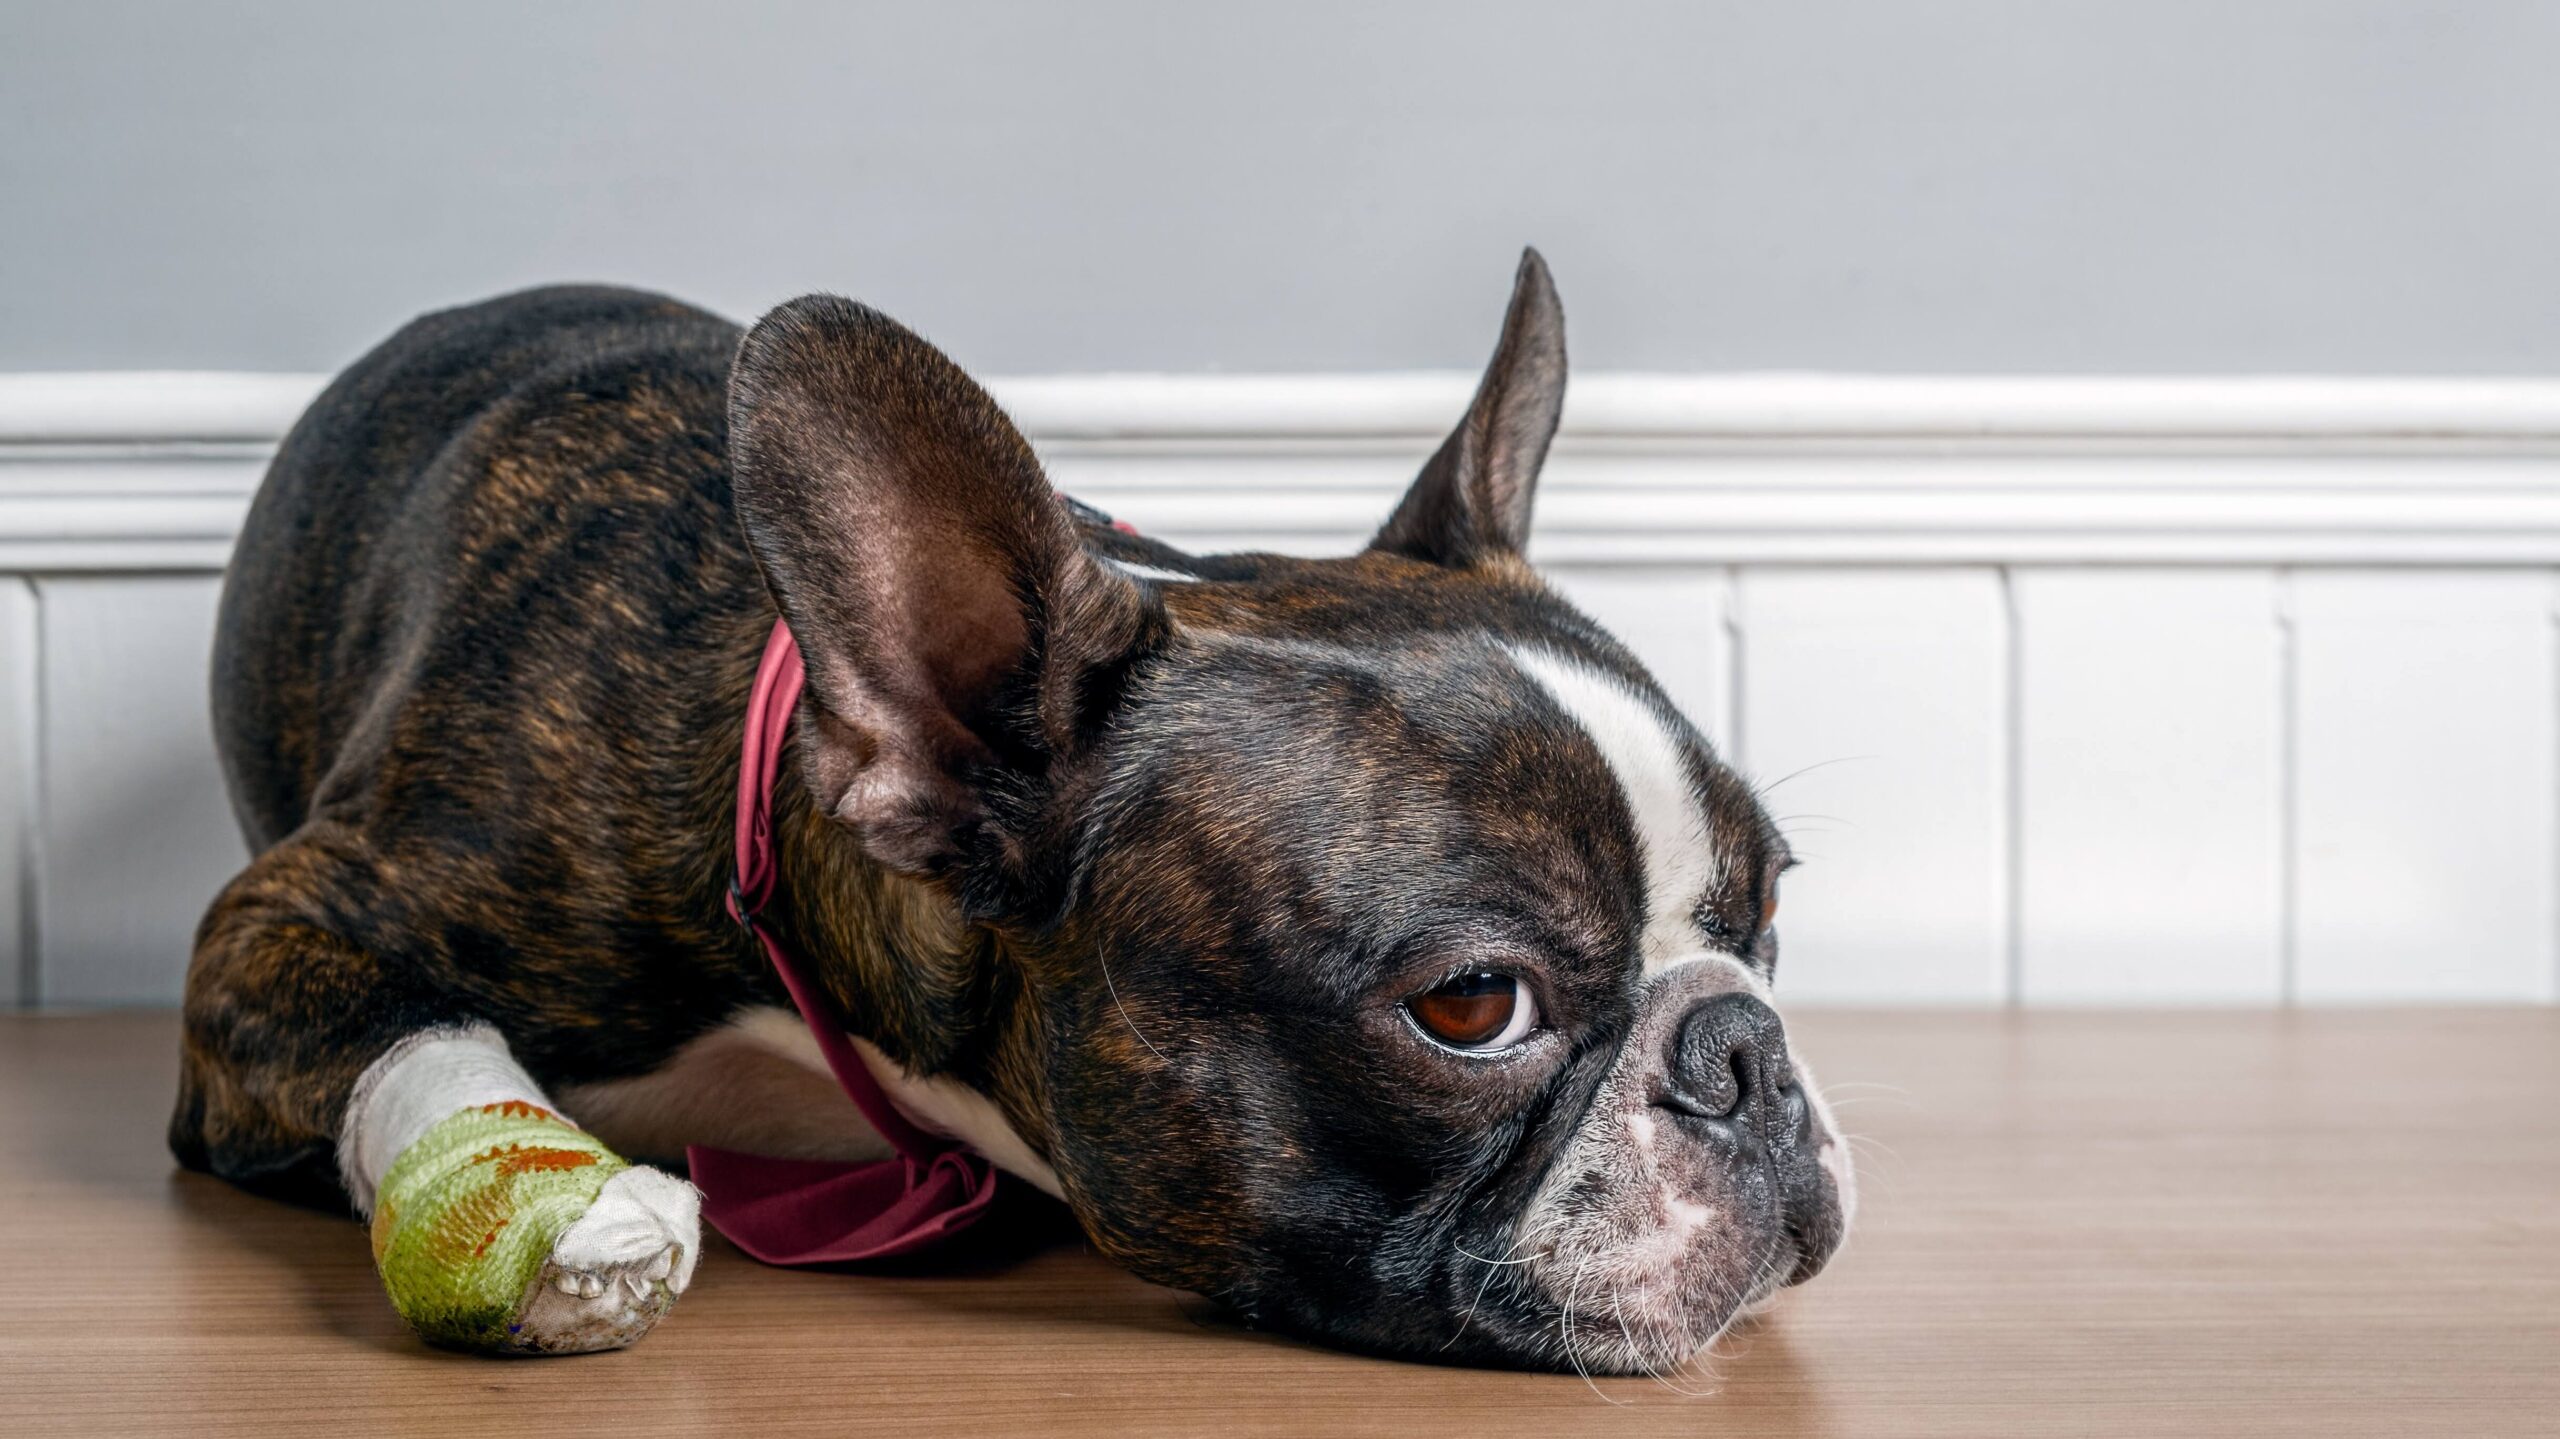 Boston terrier dog with injury and bandage in paw lying down and resting with sad face portrait